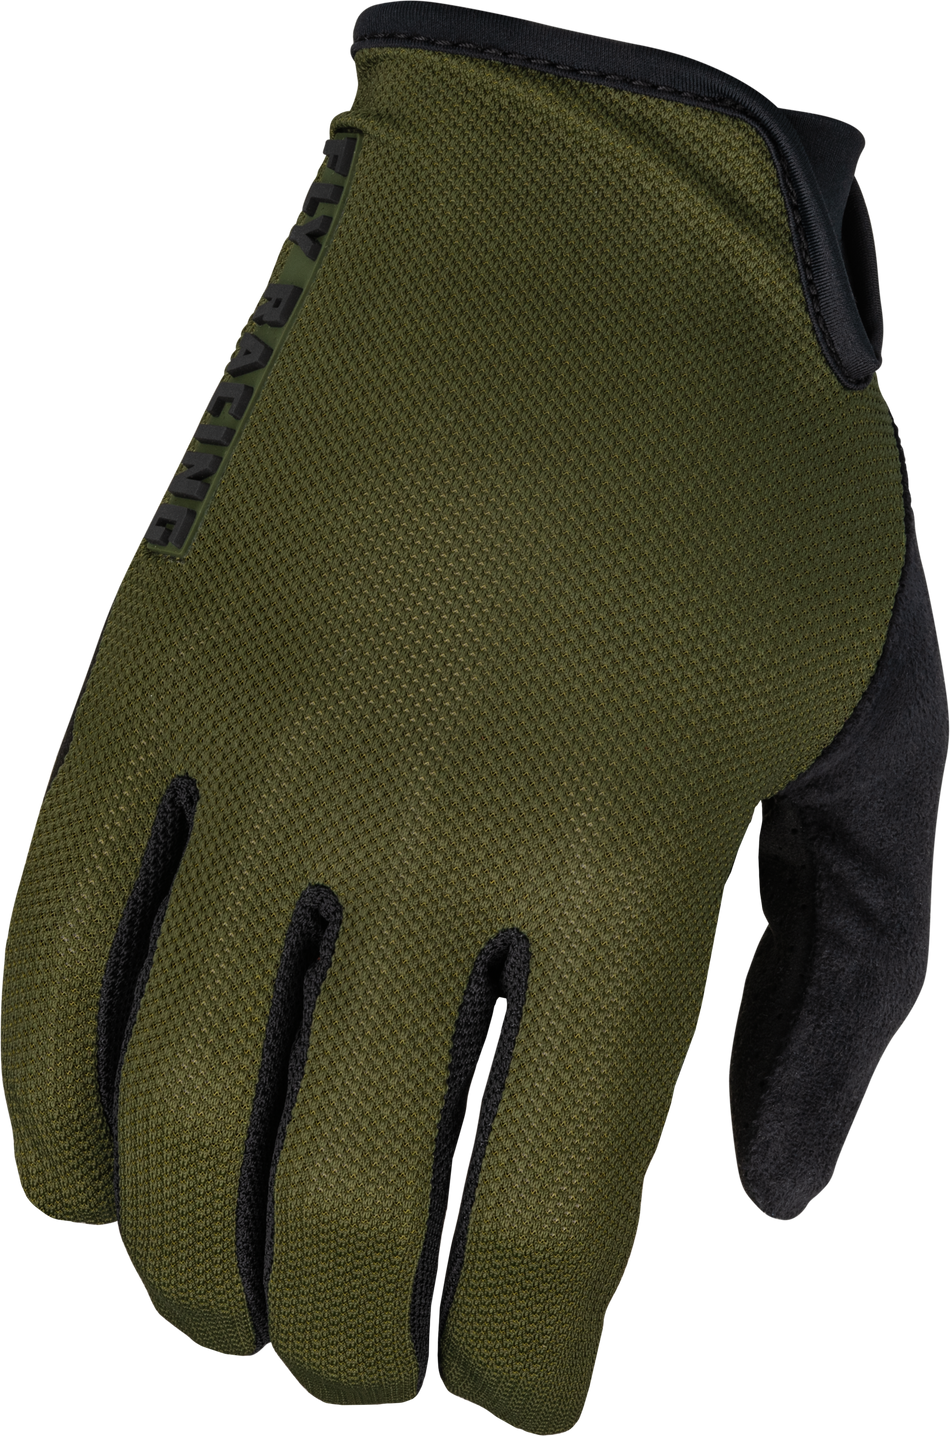 FLY RACING Mesh Gloves Dark Forest Lg 375-305L